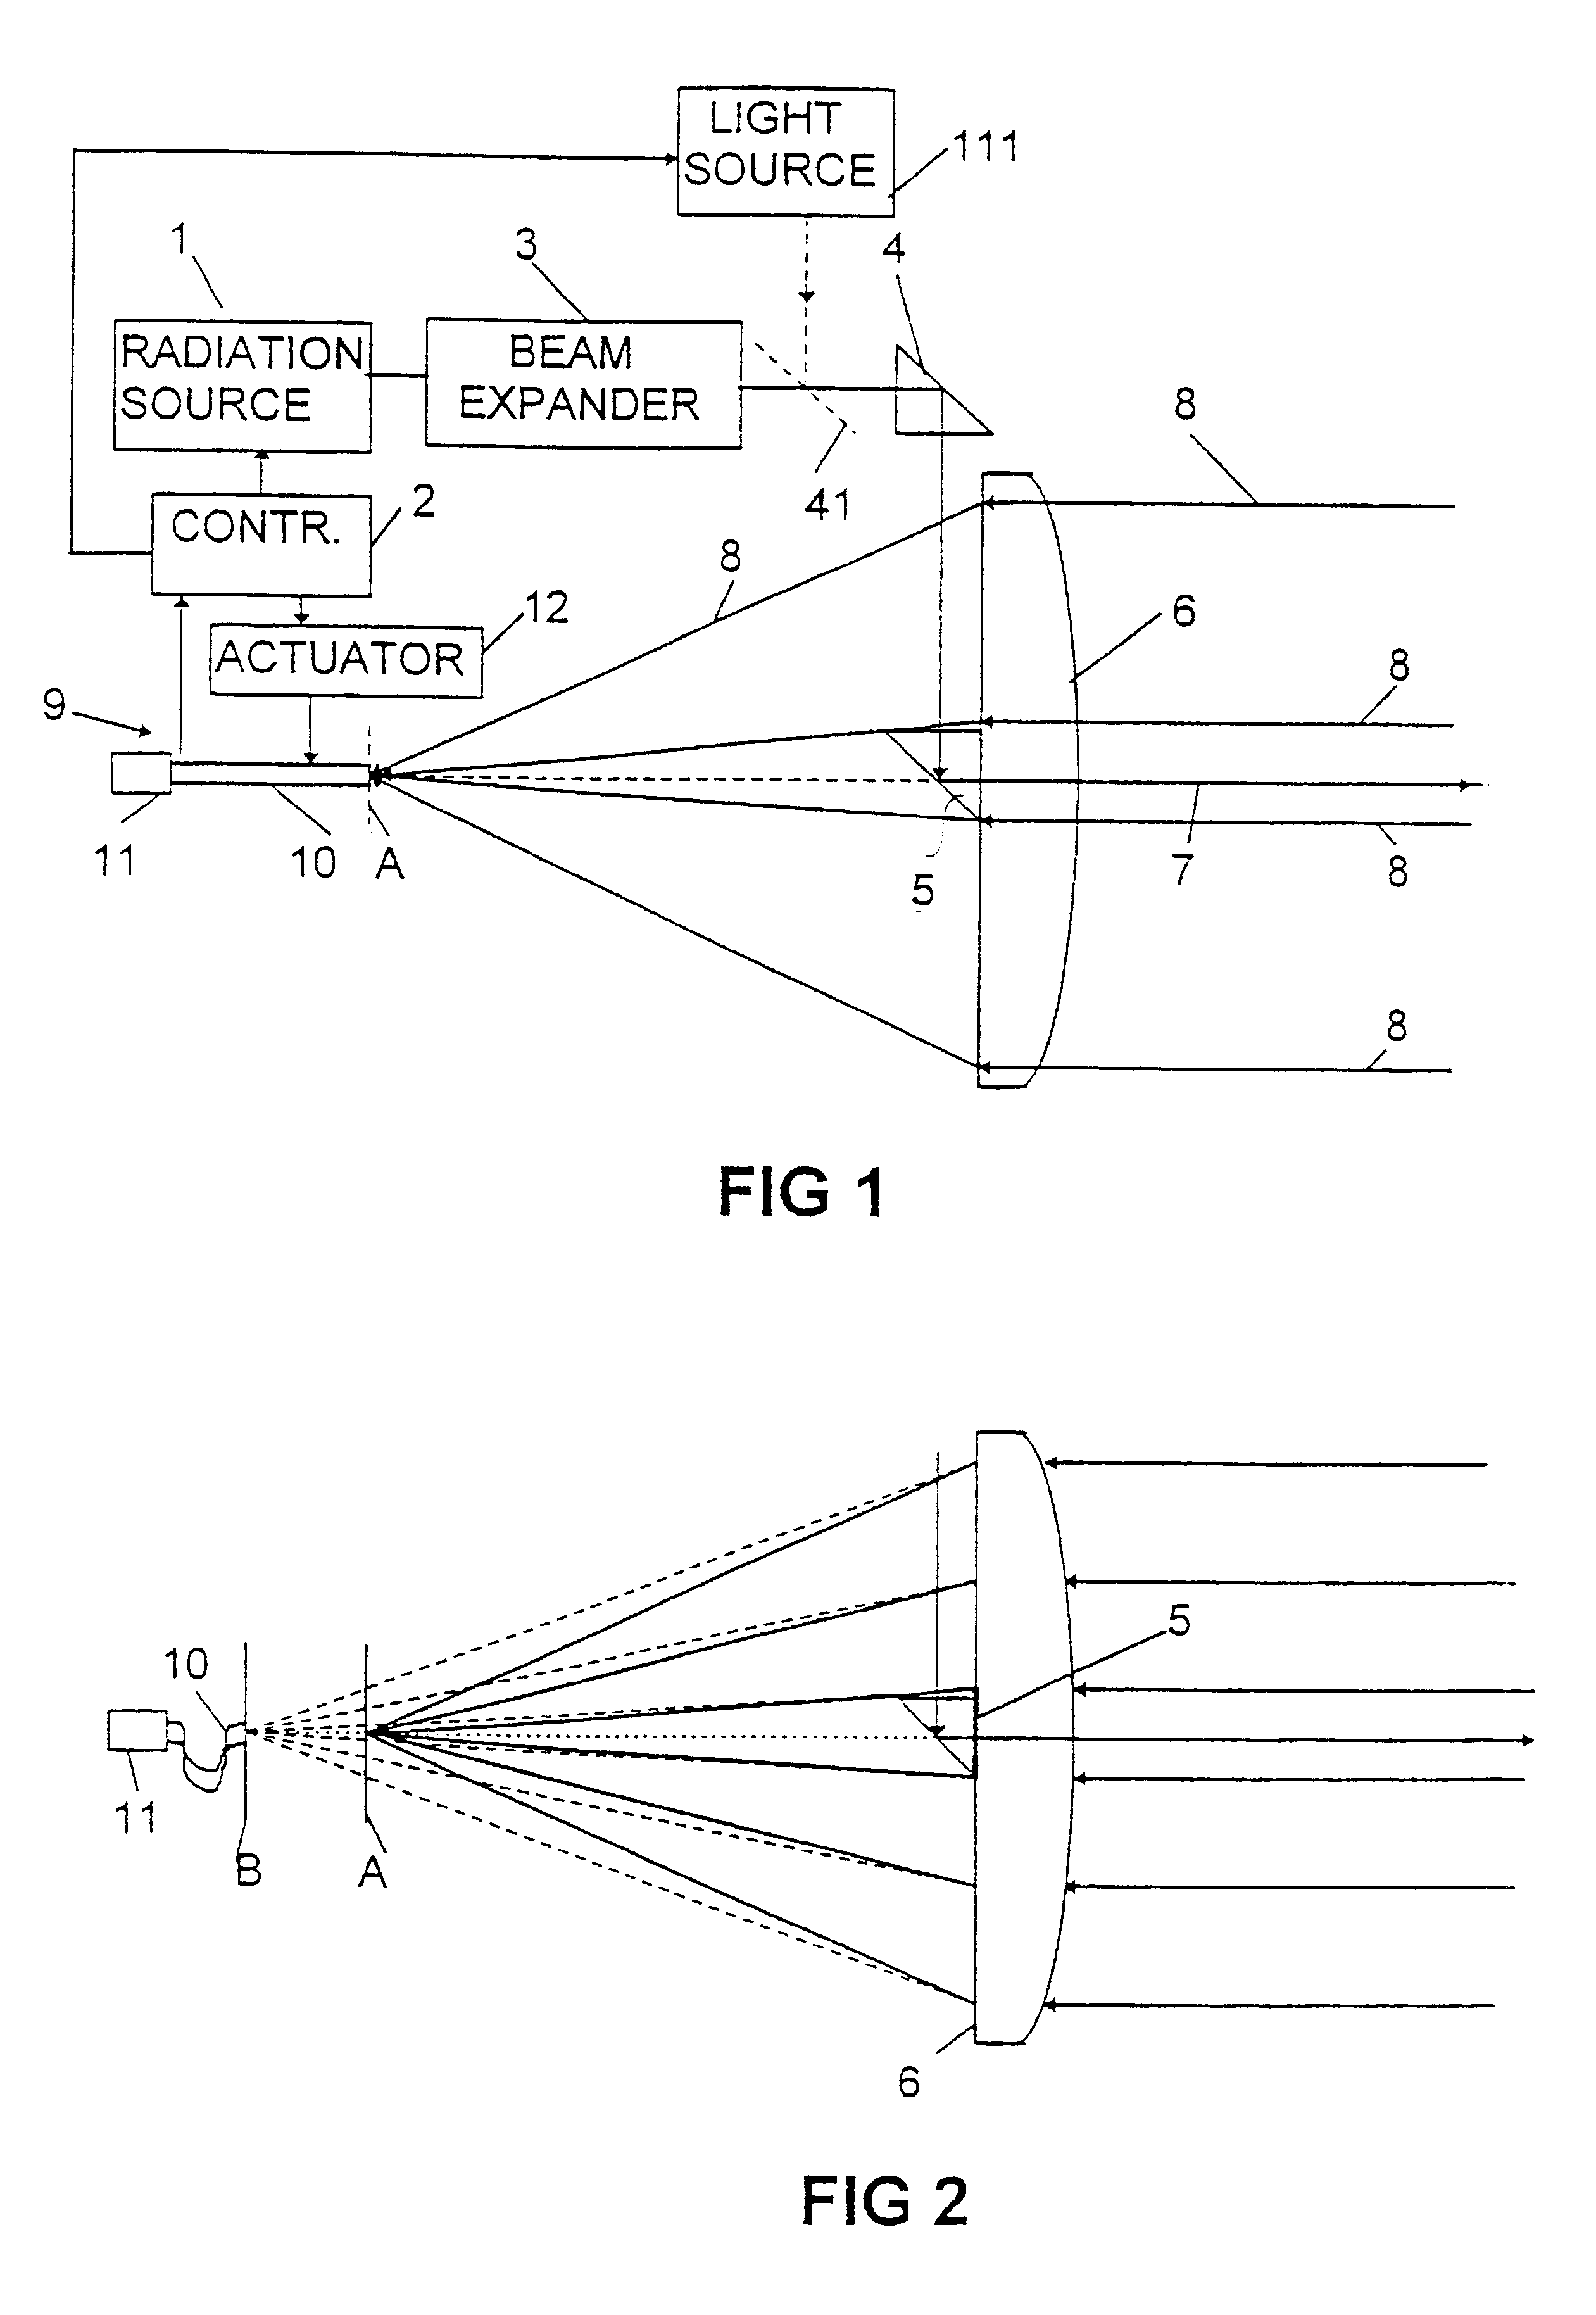 Electronic distance measuring device